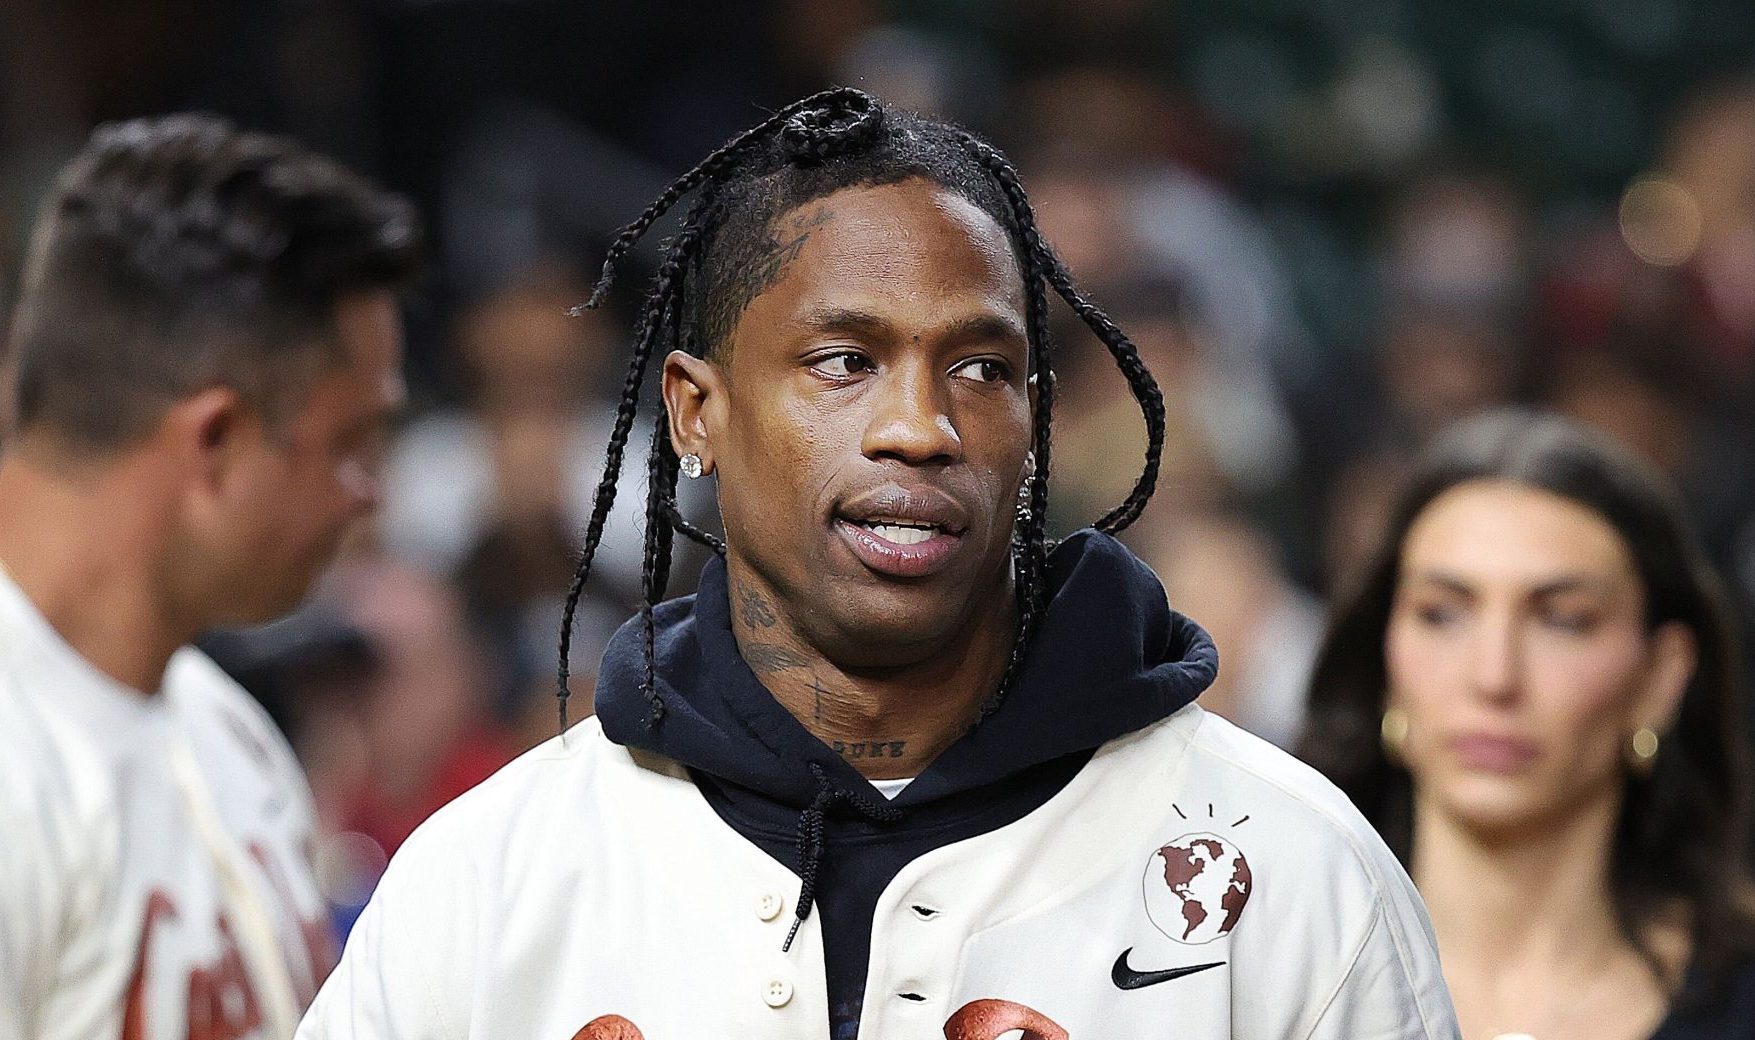 NYPD Searching For Travis Scott As Suspect In NYC Nightclub Assault After He Allegedly Punched Someone